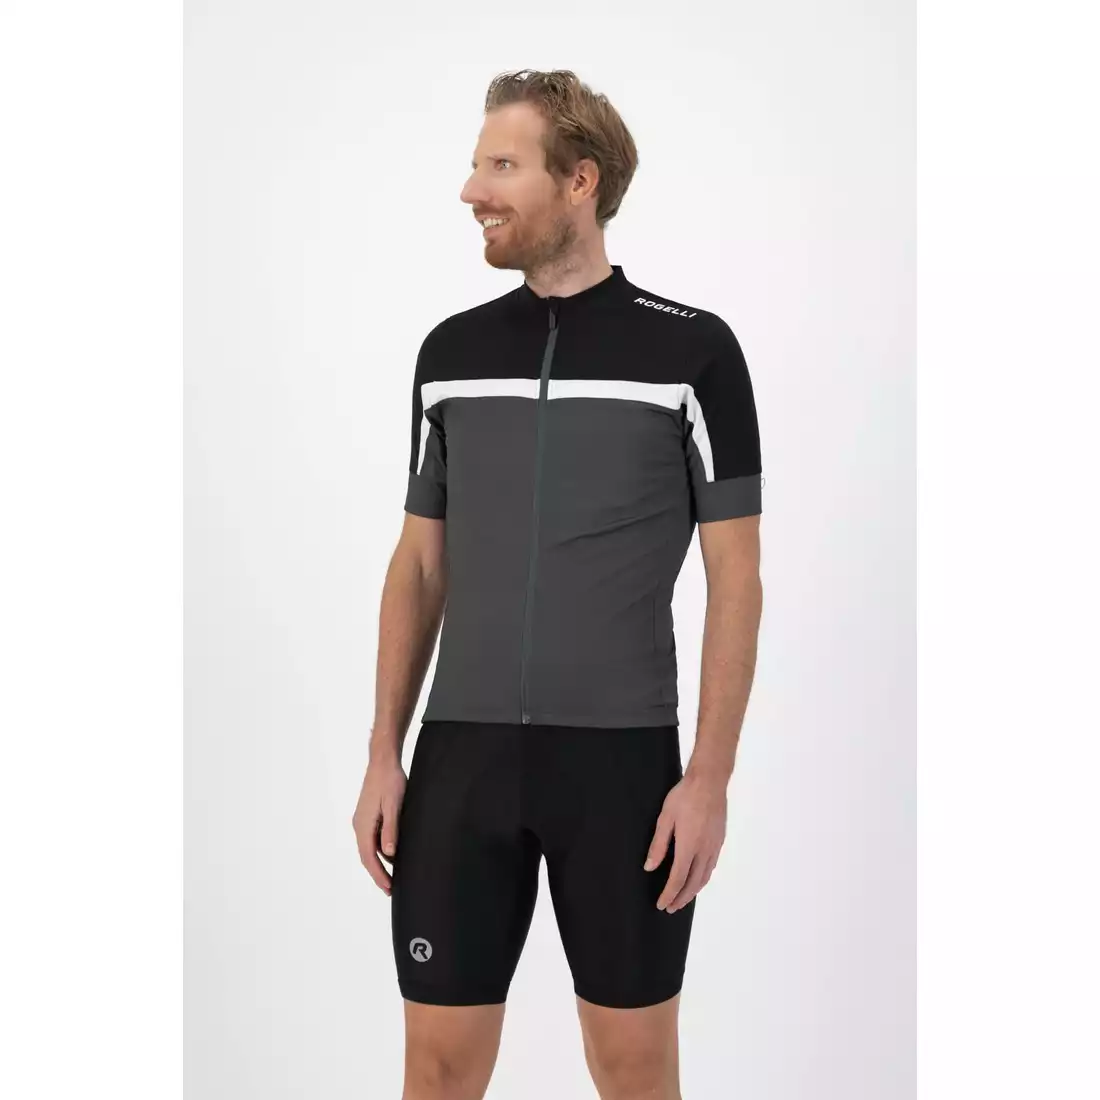 Rogelli COURSE men's cycling jersey, gray-black